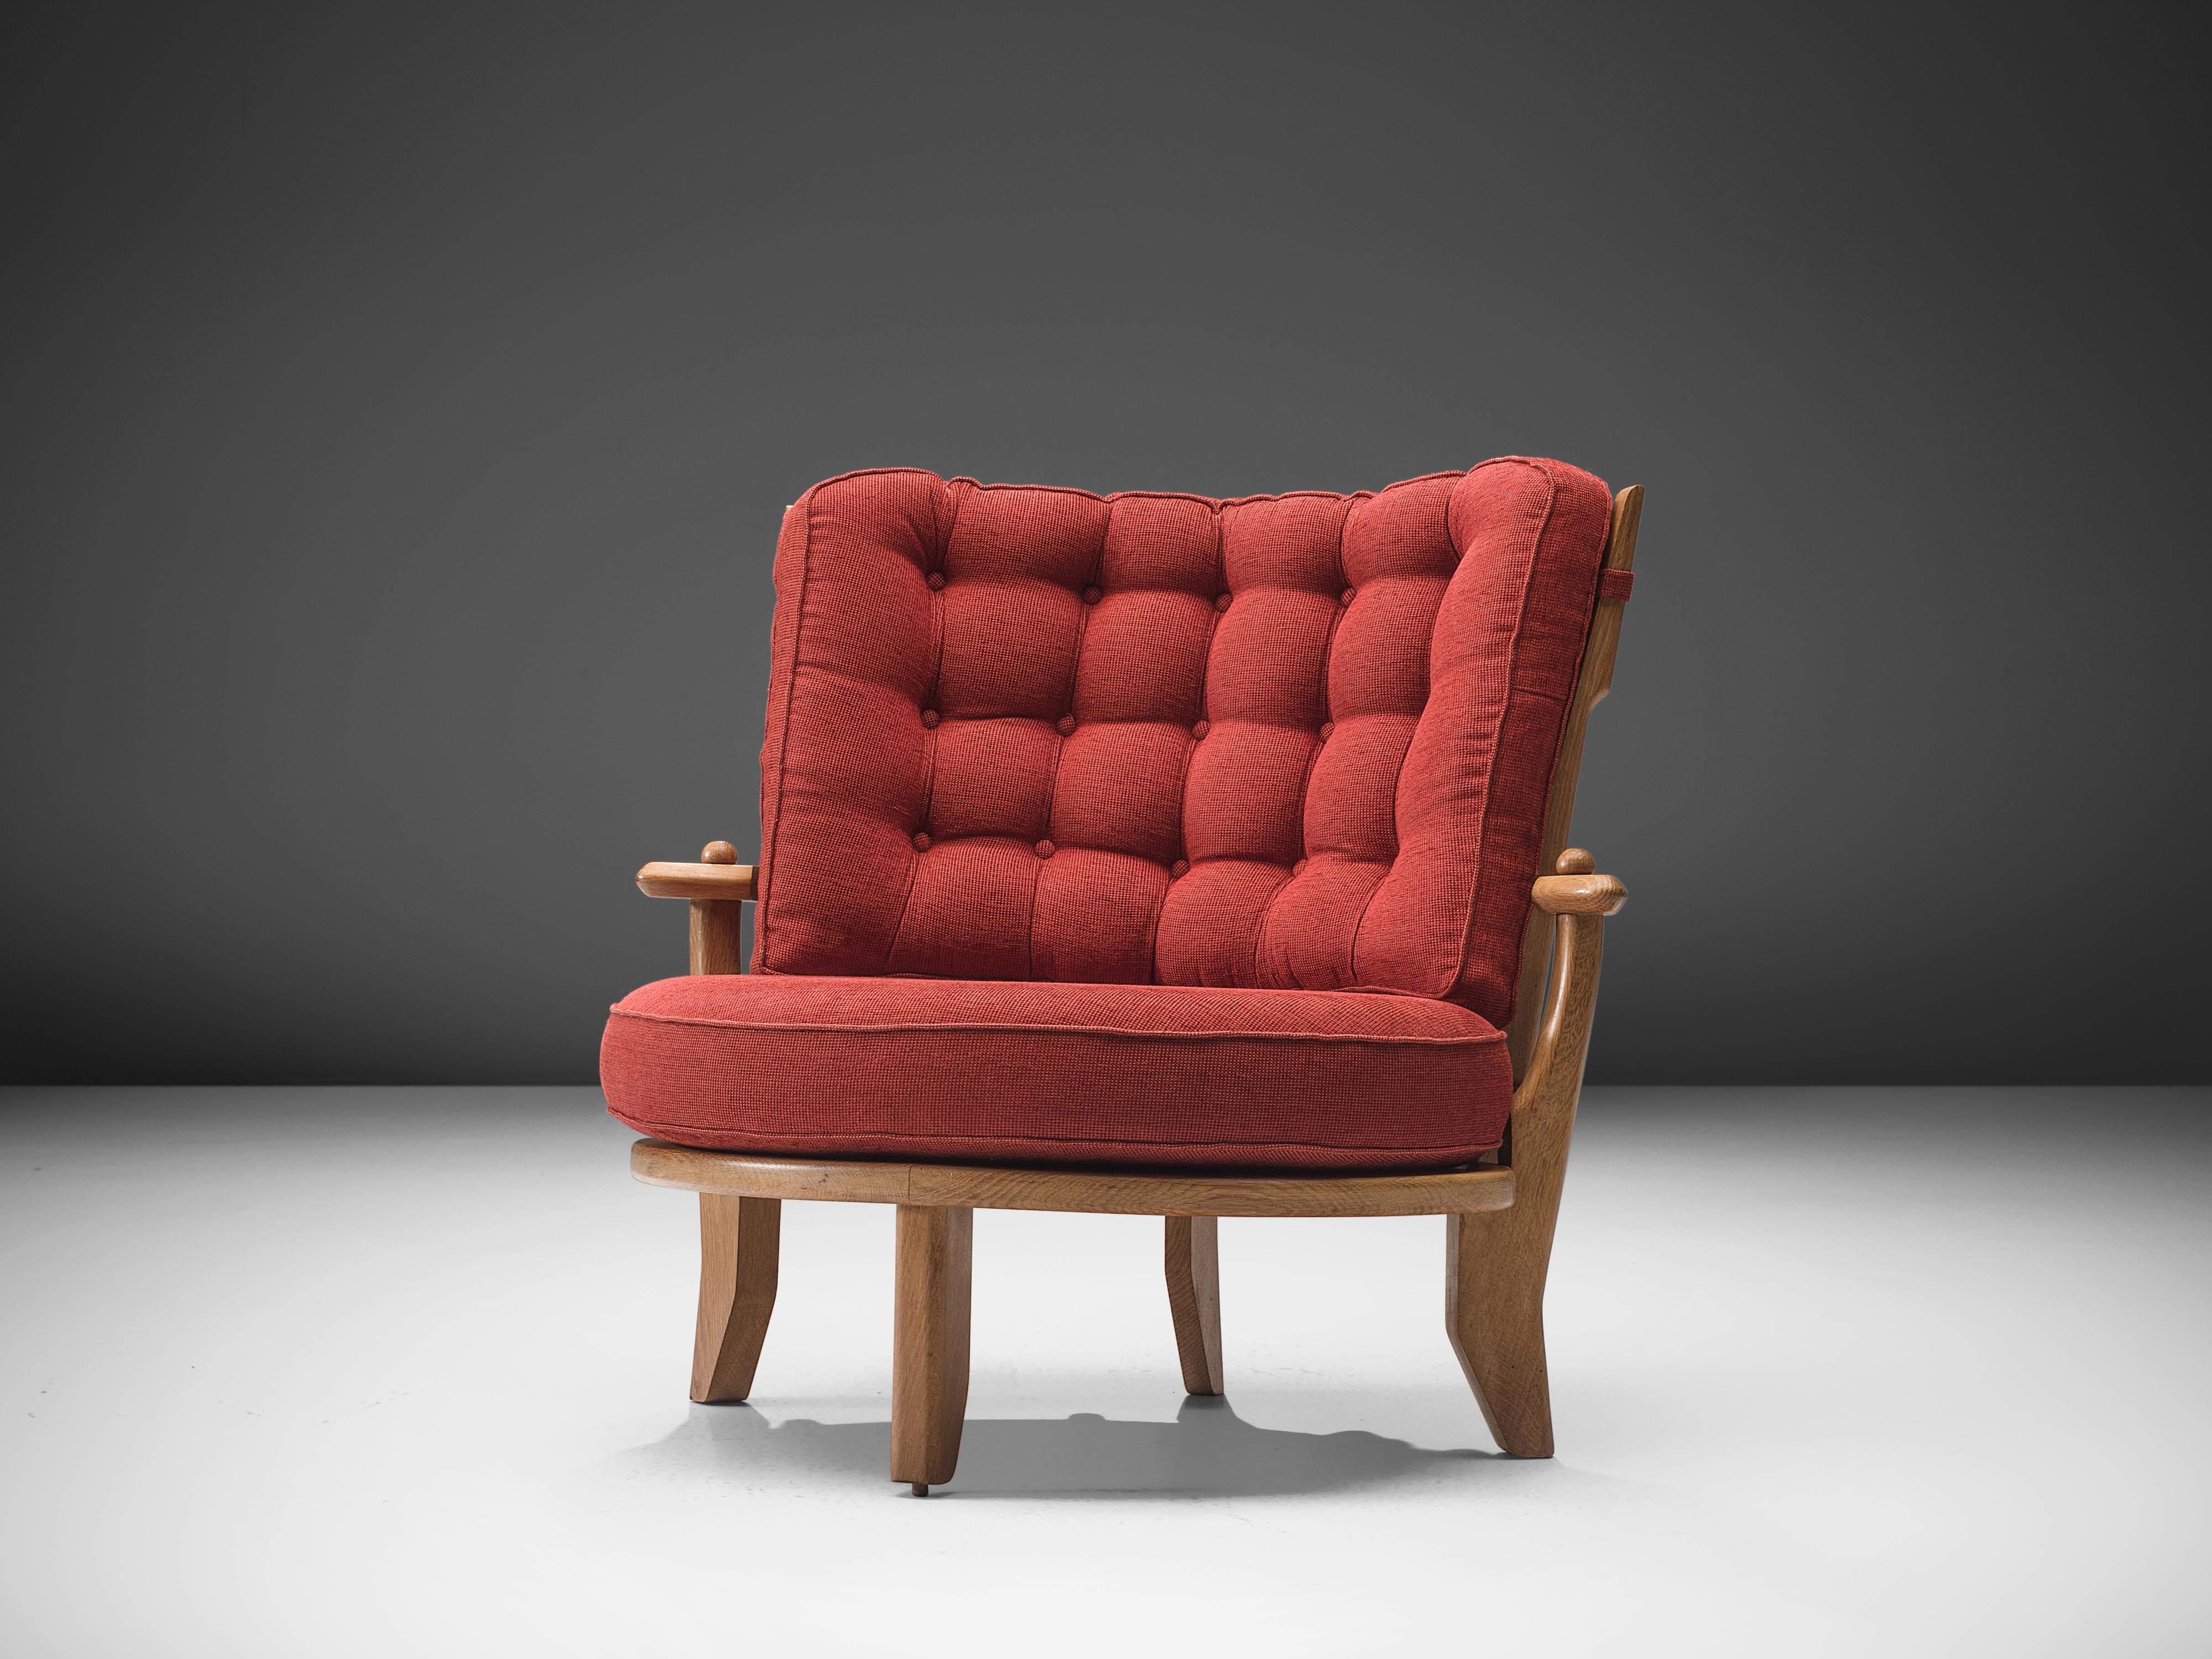 Guillerme et Chambron, lounge chair, oak, red upholstery, France, 1950s

This lounge chair has a Classic Guillerme & Chambron style. It is bulky but beautifully made, with attention to detail and comfort. Guillerme and Chambron are known for their